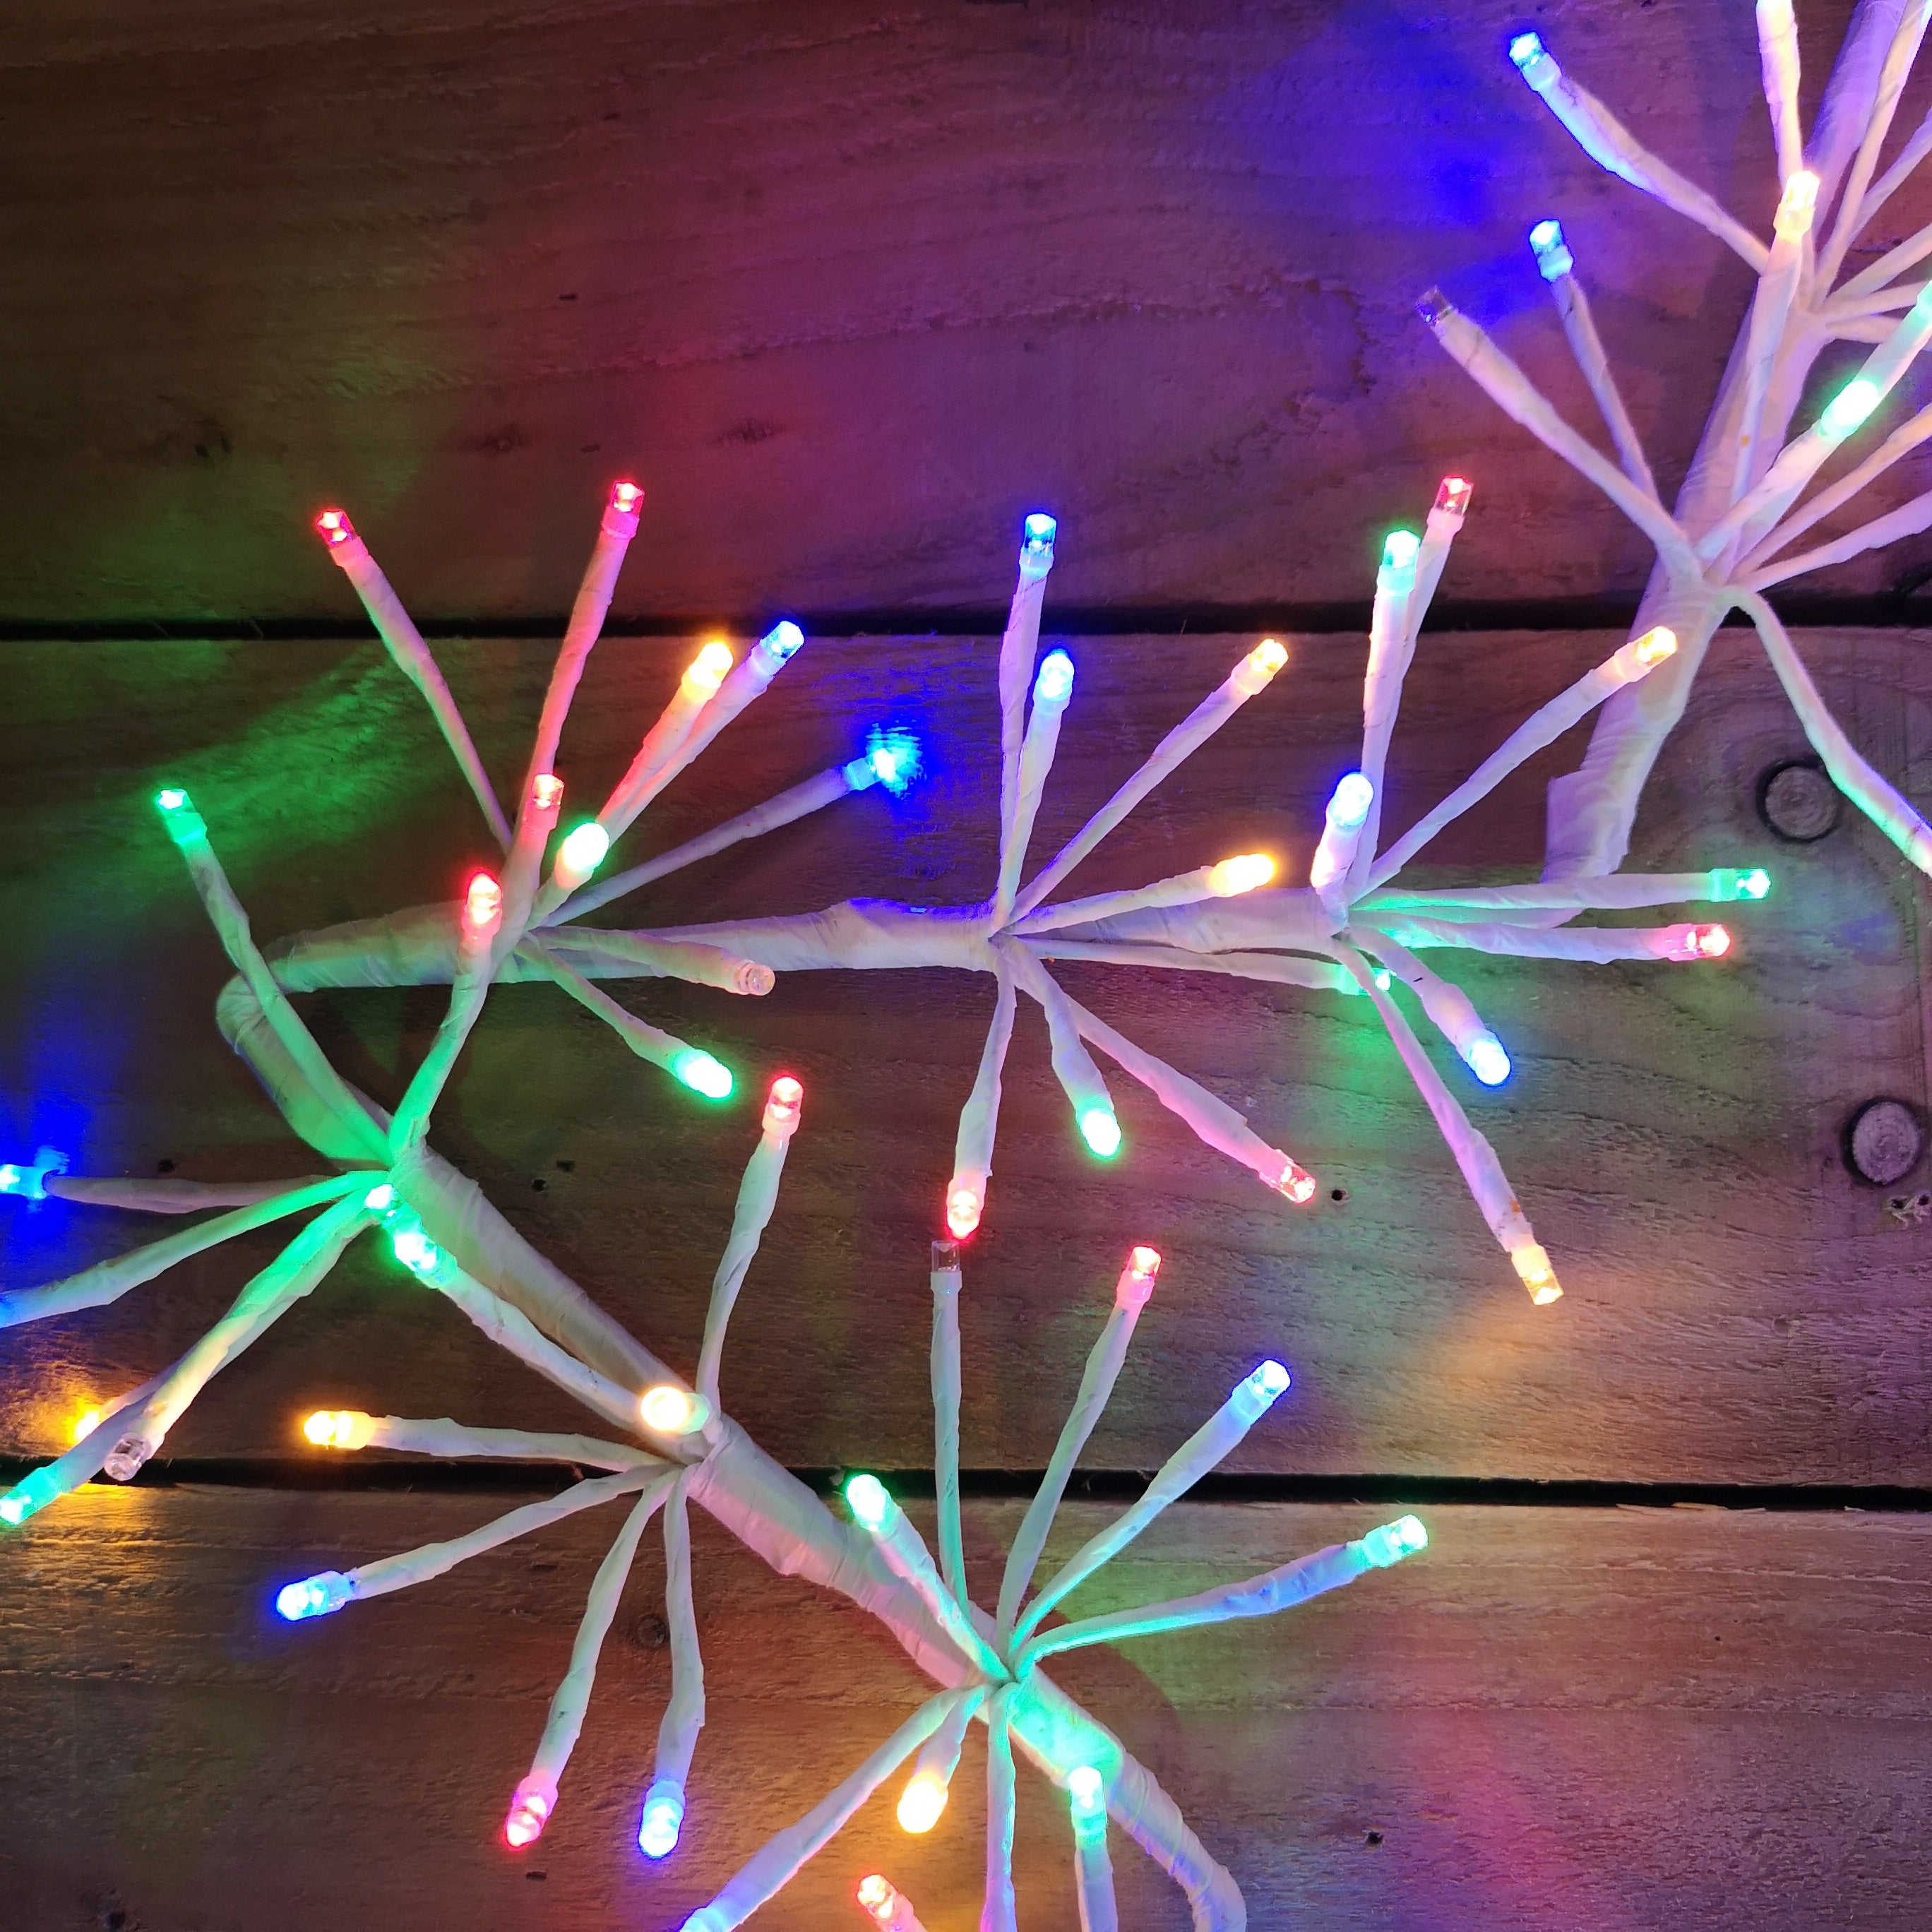 60cm Premier Multi Coloured Christmas Star Cluster Decoration with 240LED